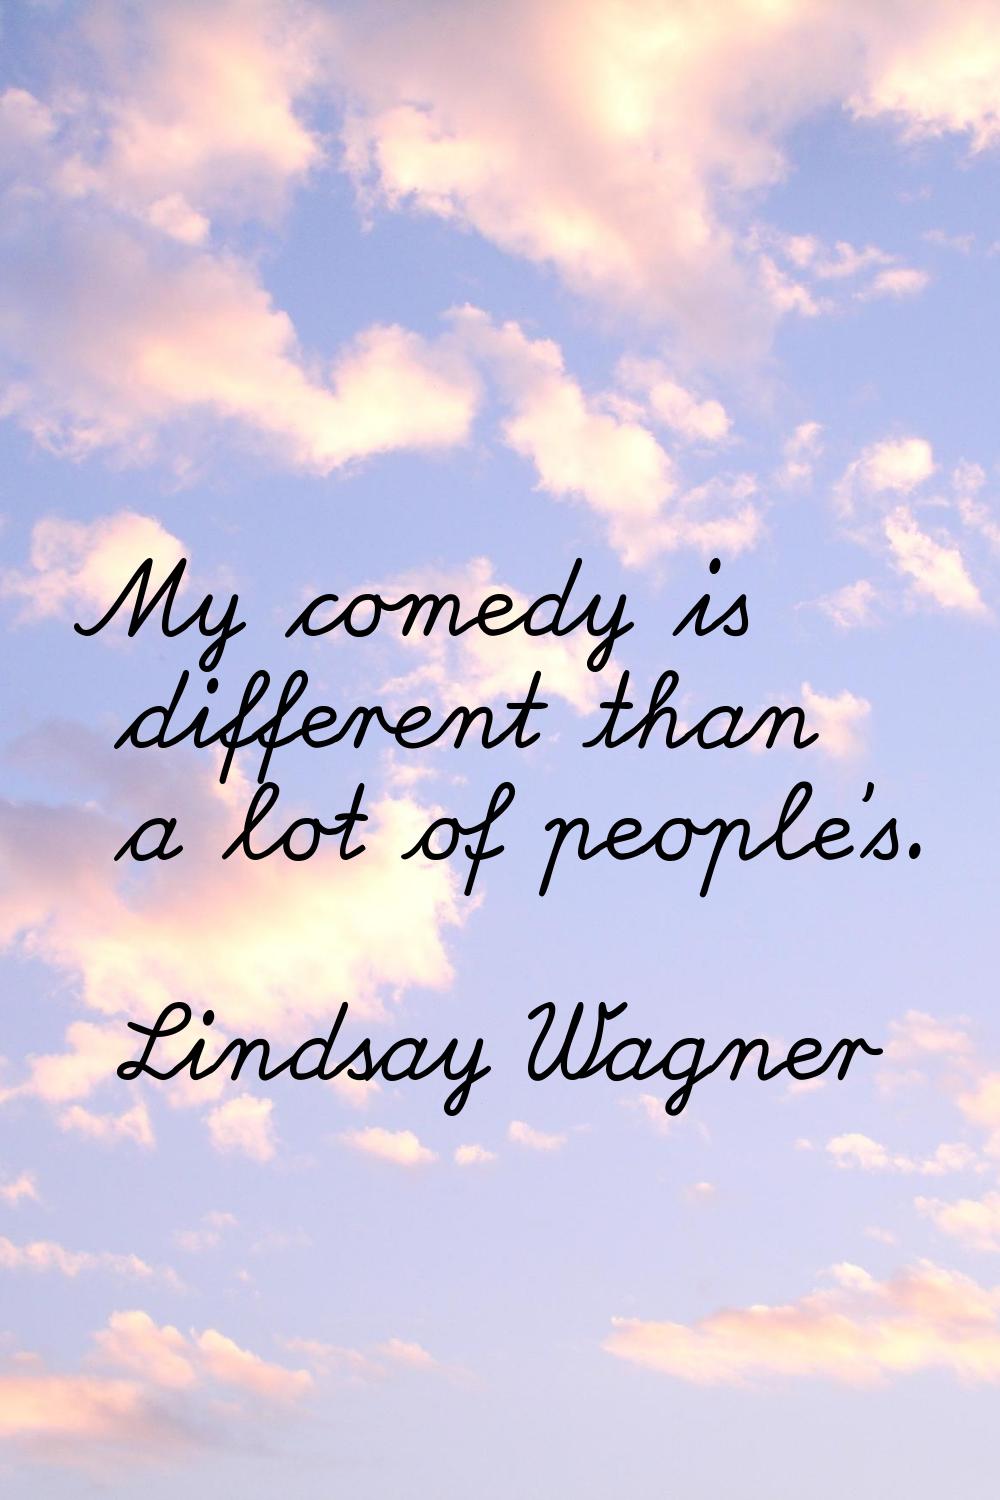 My comedy is different than a lot of people's.